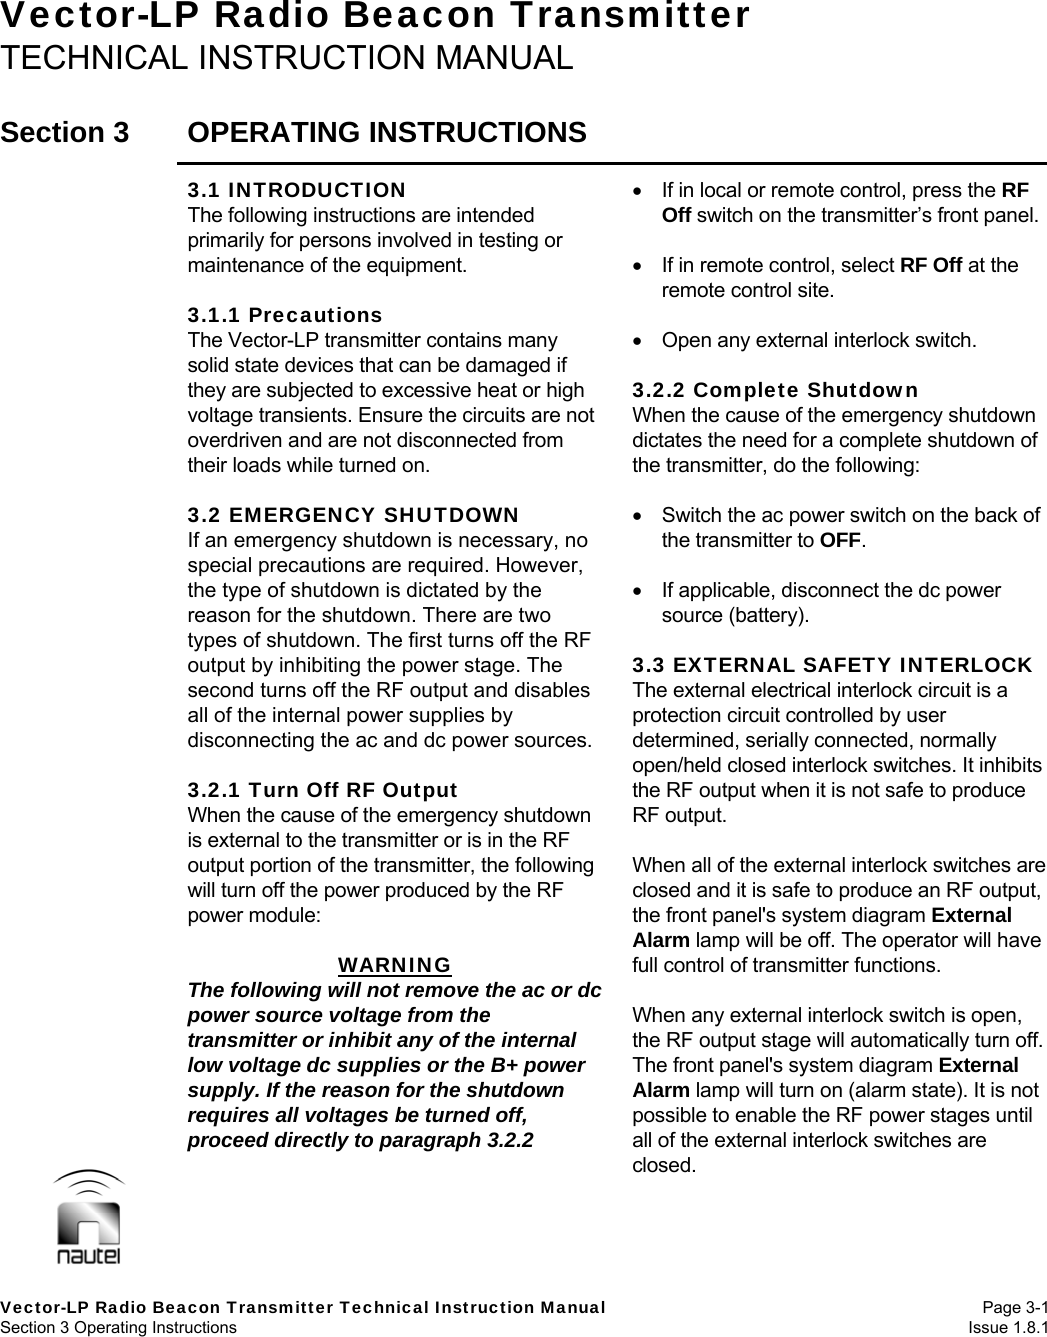   Vector-LP Radio Beacon Transmitter Technical Instruction Manual Page 3-1 Section 3 Operating Instructions  Issue 1.8.1 Vector-LP Radio Beacon Transmitter TECHNICAL INSTRUCTION MANUAL  Section 3  OPERATING INSTRUCTIONS  3.1 INTRODUCTION The following instructions are intended primarily for persons involved in testing or maintenance of the equipment.  3.1.1 Precautions The Vector-LP transmitter contains many solid state devices that can be damaged if they are subjected to excessive heat or high voltage transients. Ensure the circuits are not overdriven and are not disconnected from their loads while turned on.  3.2 EMERGENCY SHUTDOWN If an emergency shutdown is necessary, no special precautions are required. However, the type of shutdown is dictated by the reason for the shutdown. There are two types of shutdown. The first turns off the RF output by inhibiting the power stage. The second turns off the RF output and disables all of the internal power supplies by disconnecting the ac and dc power sources.  3.2.1 Turn Off RF Output When the cause of the emergency shutdown is external to the transmitter or is in the RF output portion of the transmitter, the following will turn off the power produced by the RF power module:  WARNING The following will not remove the ac or dc power source voltage from the transmitter or inhibit any of the internal low voltage dc supplies or the B+ power supply. If the reason for the shutdown requires all voltages be turned off, proceed directly to paragraph 3.2.2    If in local or remote control, press the RF Off switch on the transmitter’s front panel.    If in remote control, select RF Off at the remote control site.     Open any external interlock switch.  3.2.2 Complete Shutdown When the cause of the emergency shutdown dictates the need for a complete shutdown of the transmitter, do the following:    Switch the ac power switch on the back of the transmitter to OFF.   If applicable, disconnect the dc power source (battery).  3.3 EXTERNAL SAFETY INTERLOCK The external electrical interlock circuit is a protection circuit controlled by user determined, serially connected, normally open/held closed interlock switches. It inhibits the RF output when it is not safe to produce RF output.  When all of the external interlock switches are closed and it is safe to produce an RF output, the front panel&apos;s system diagram External Alarm lamp will be off. The operator will have full control of transmitter functions.  When any external interlock switch is open, the RF output stage will automatically turn off. The front panel&apos;s system diagram External Alarm lamp will turn on (alarm state). It is not possible to enable the RF power stages until all of the external interlock switches are closed. 